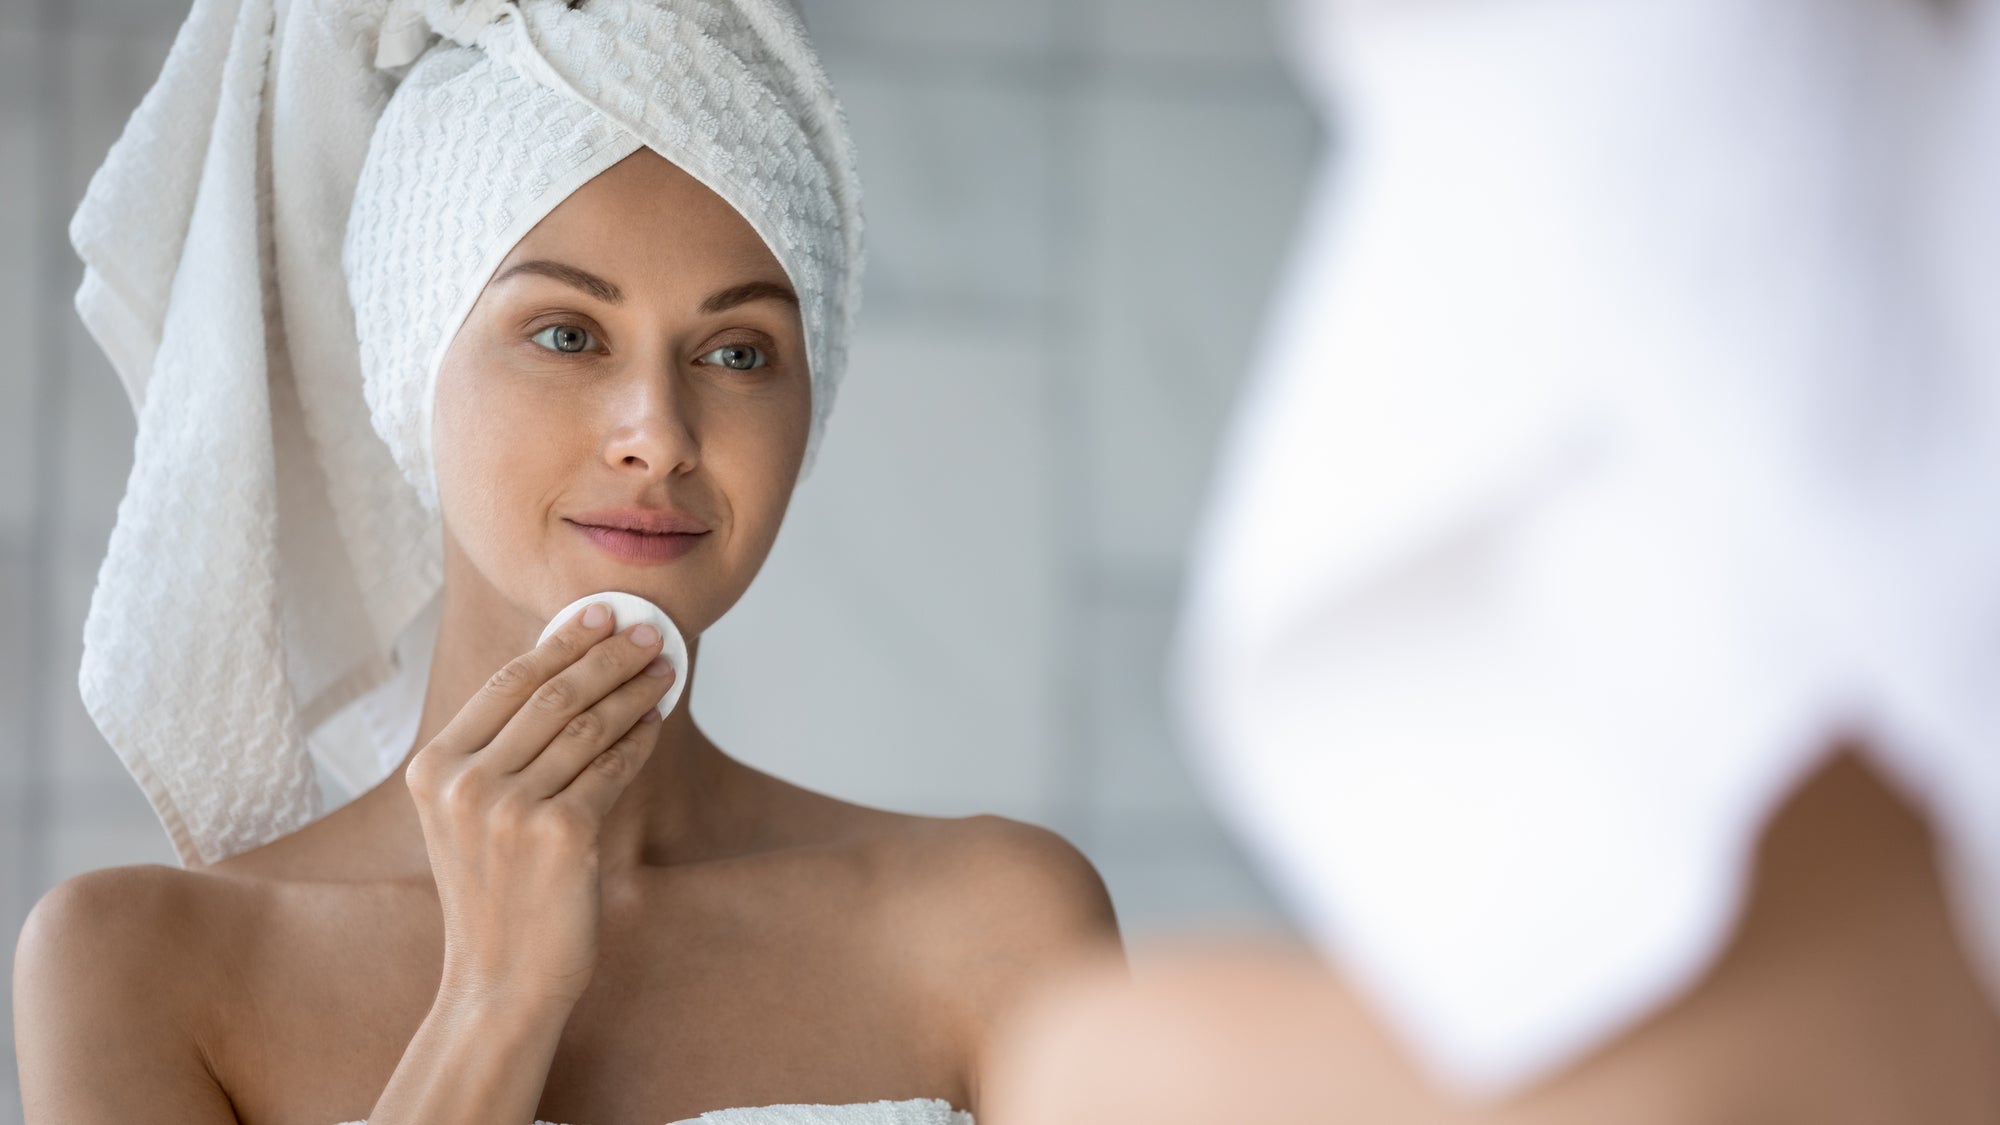 women looking in mirror and cleansing her face with cotton pad, Parisians Pure Skincare